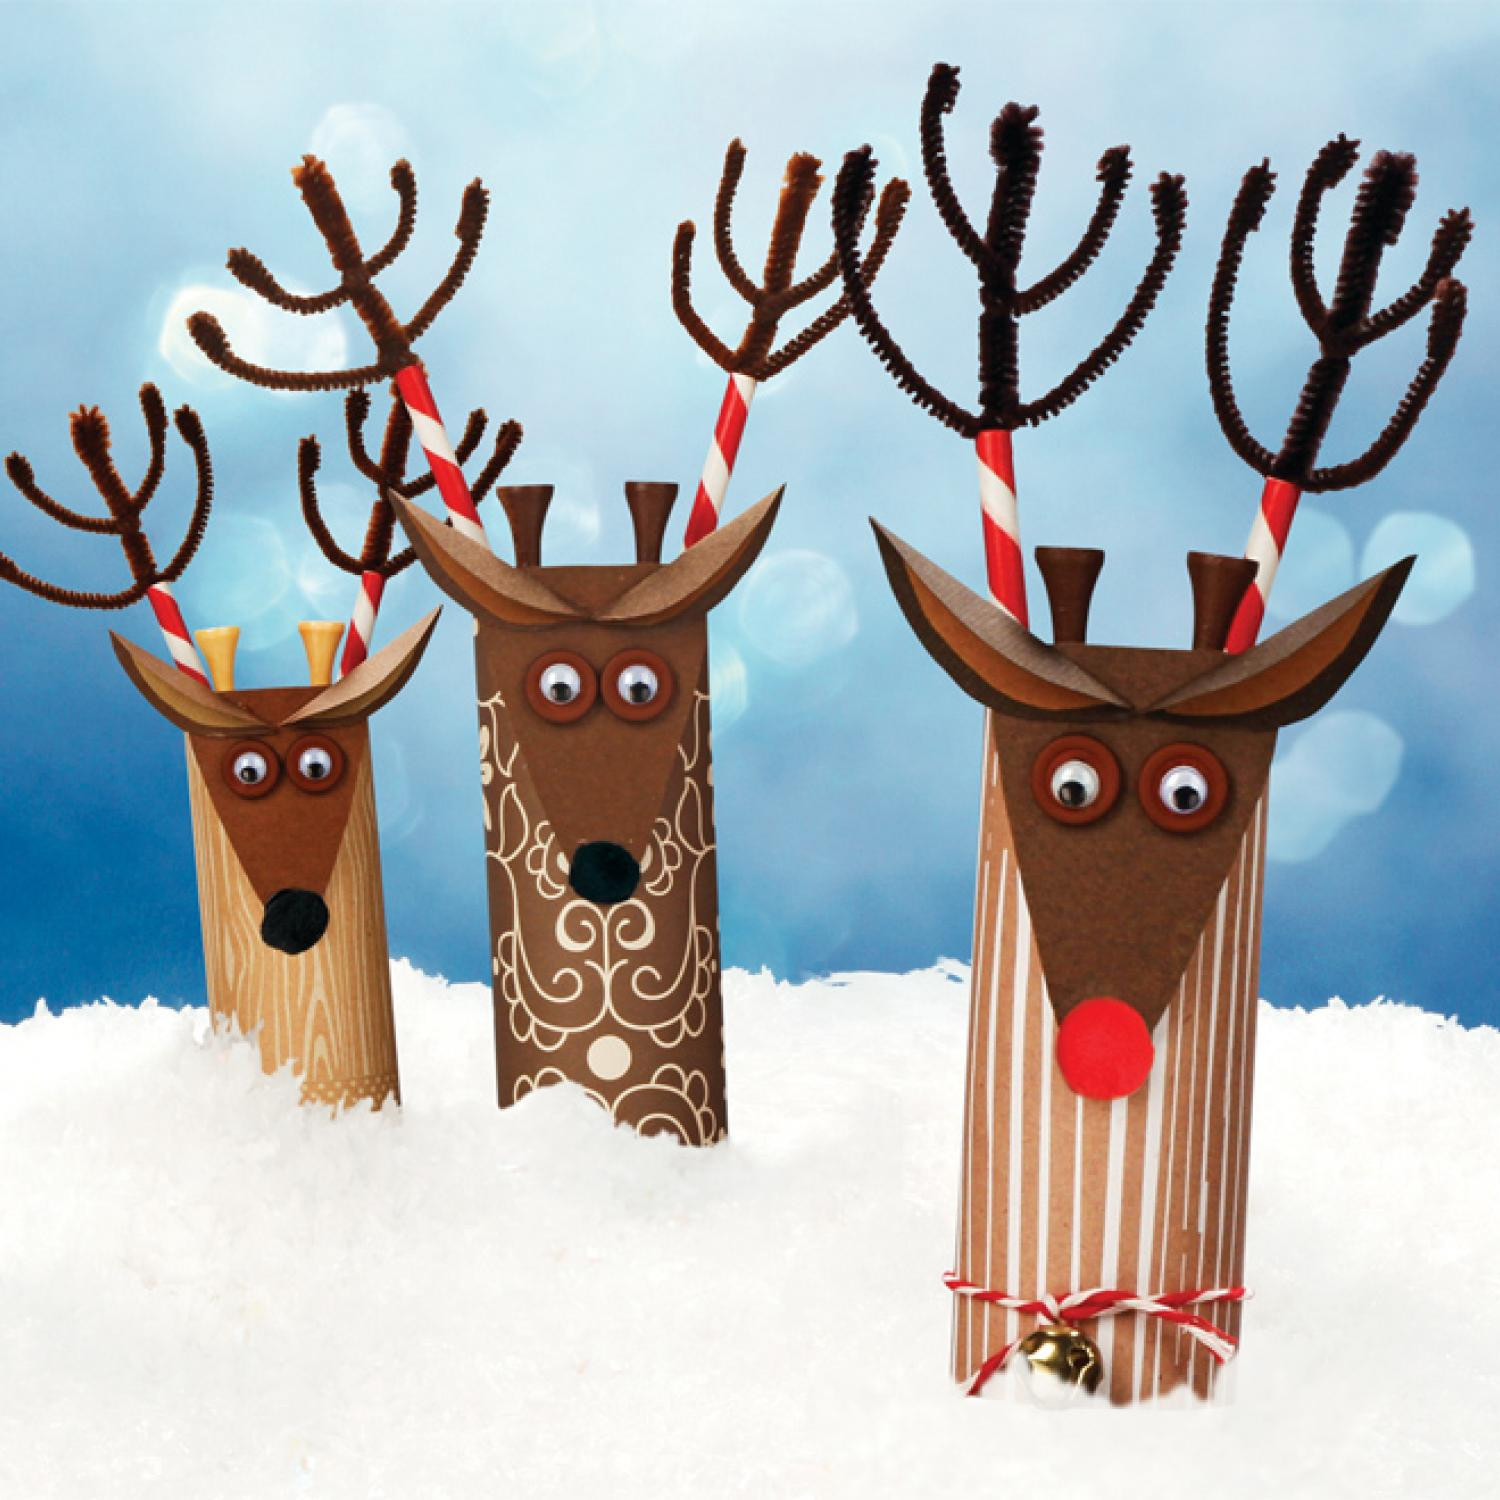 Reindeer Craft For Kids
 Easy Christmas Crafts and Activities for Kids